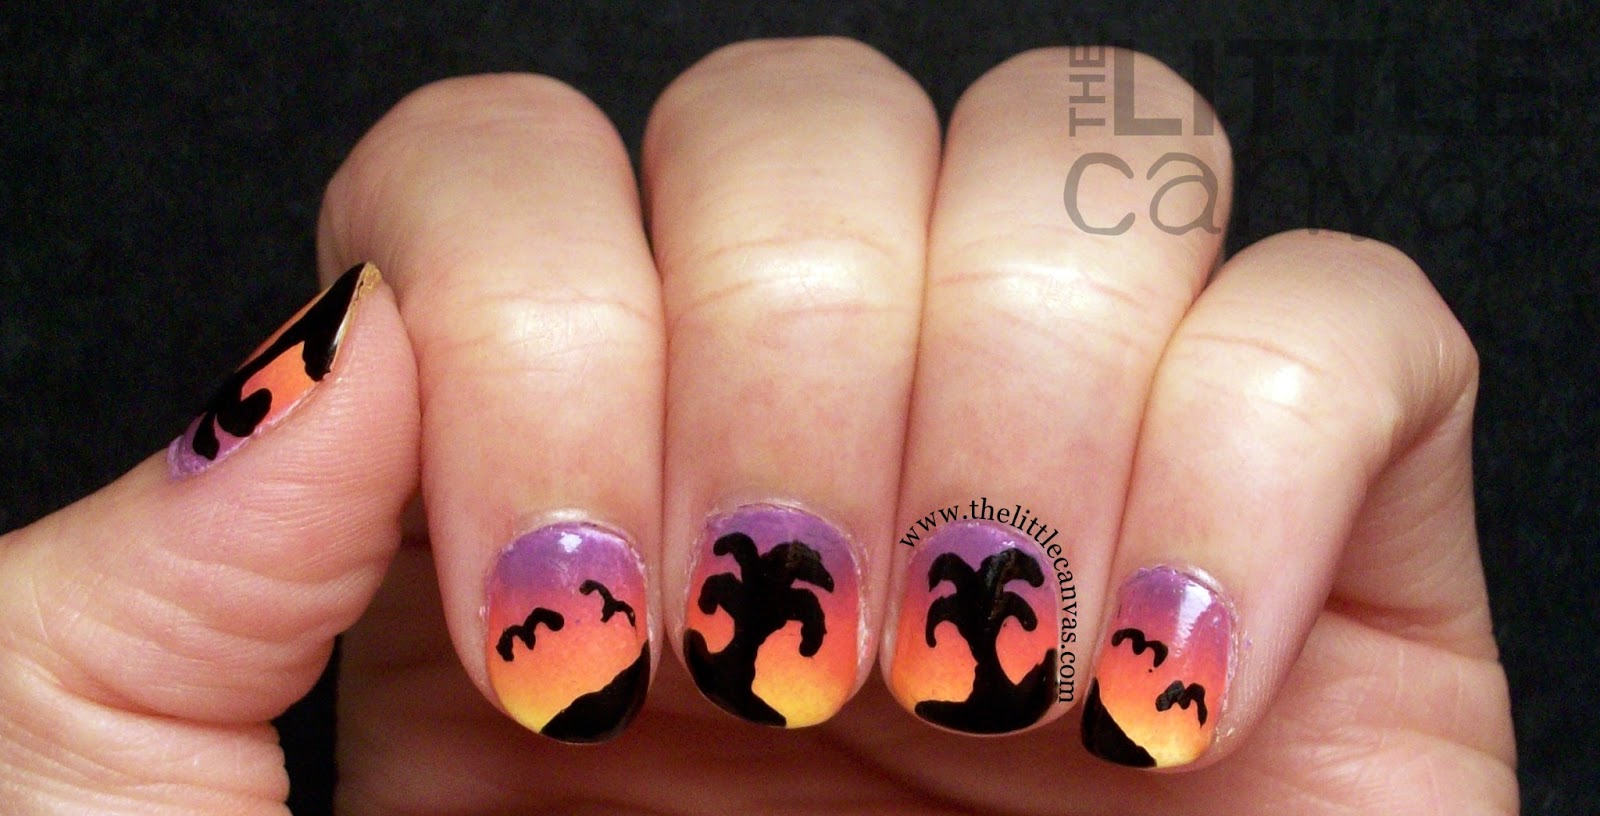 2. Tropical Palm Tree Nails - wide 9